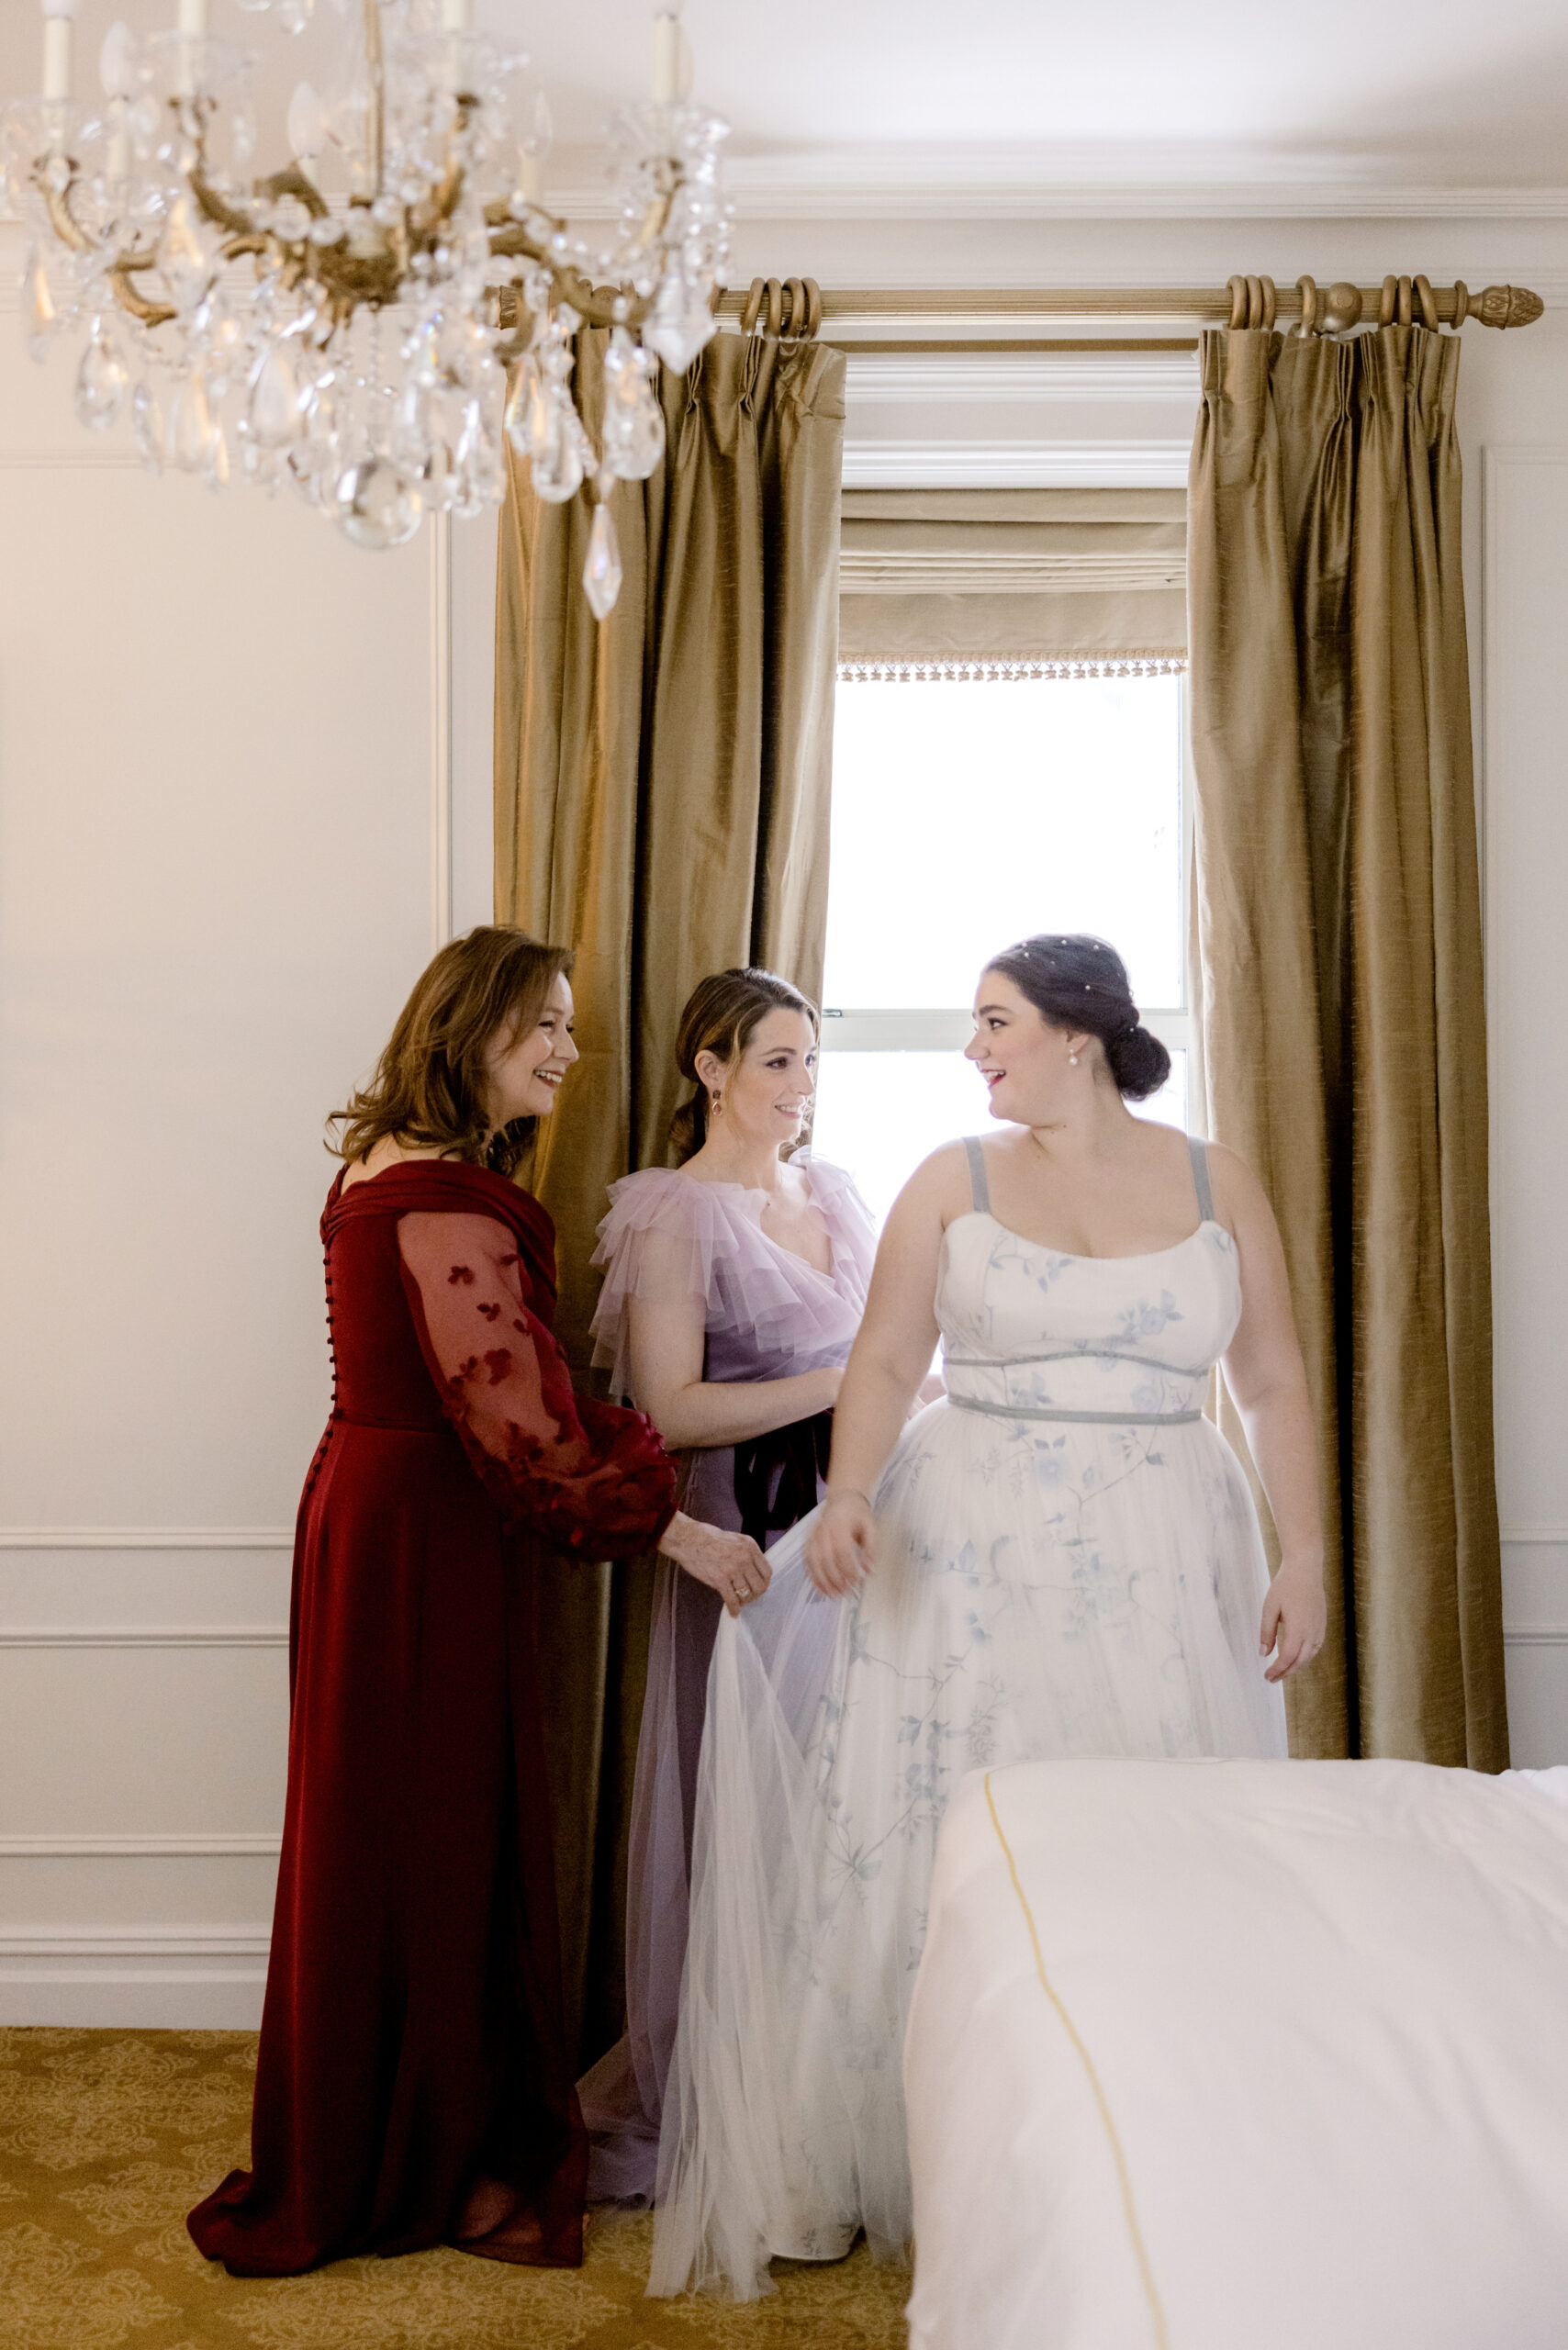 The bride's mom and her sister are fixing her wedding dress. Capturing emotions image by Jenny Fu Studio 